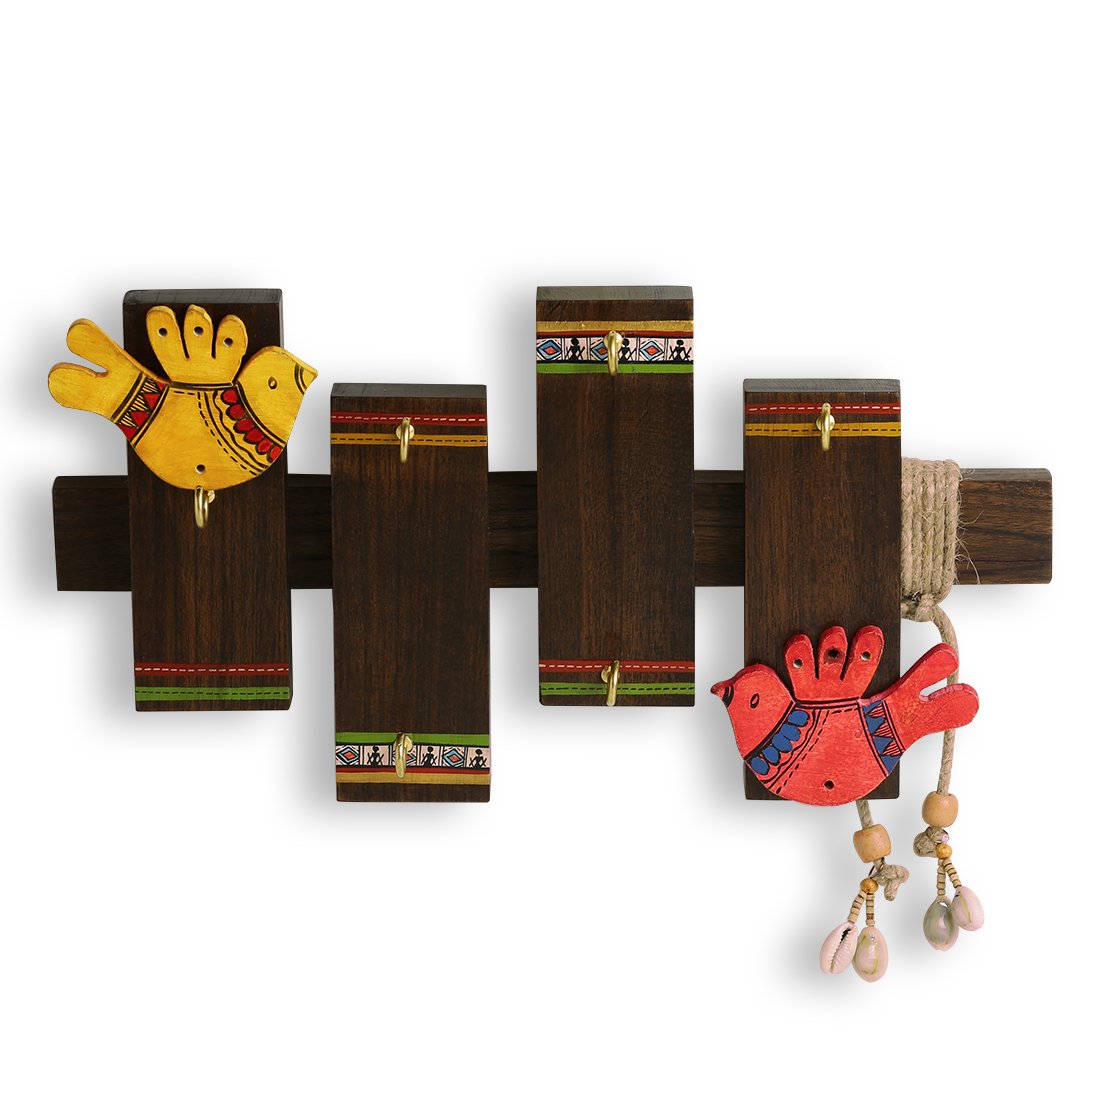 ExclusiveLane 'Birds On Planks' Warli Hand-Painted Home Decorative Key Hanger Stand-CLASSIBLOGGER